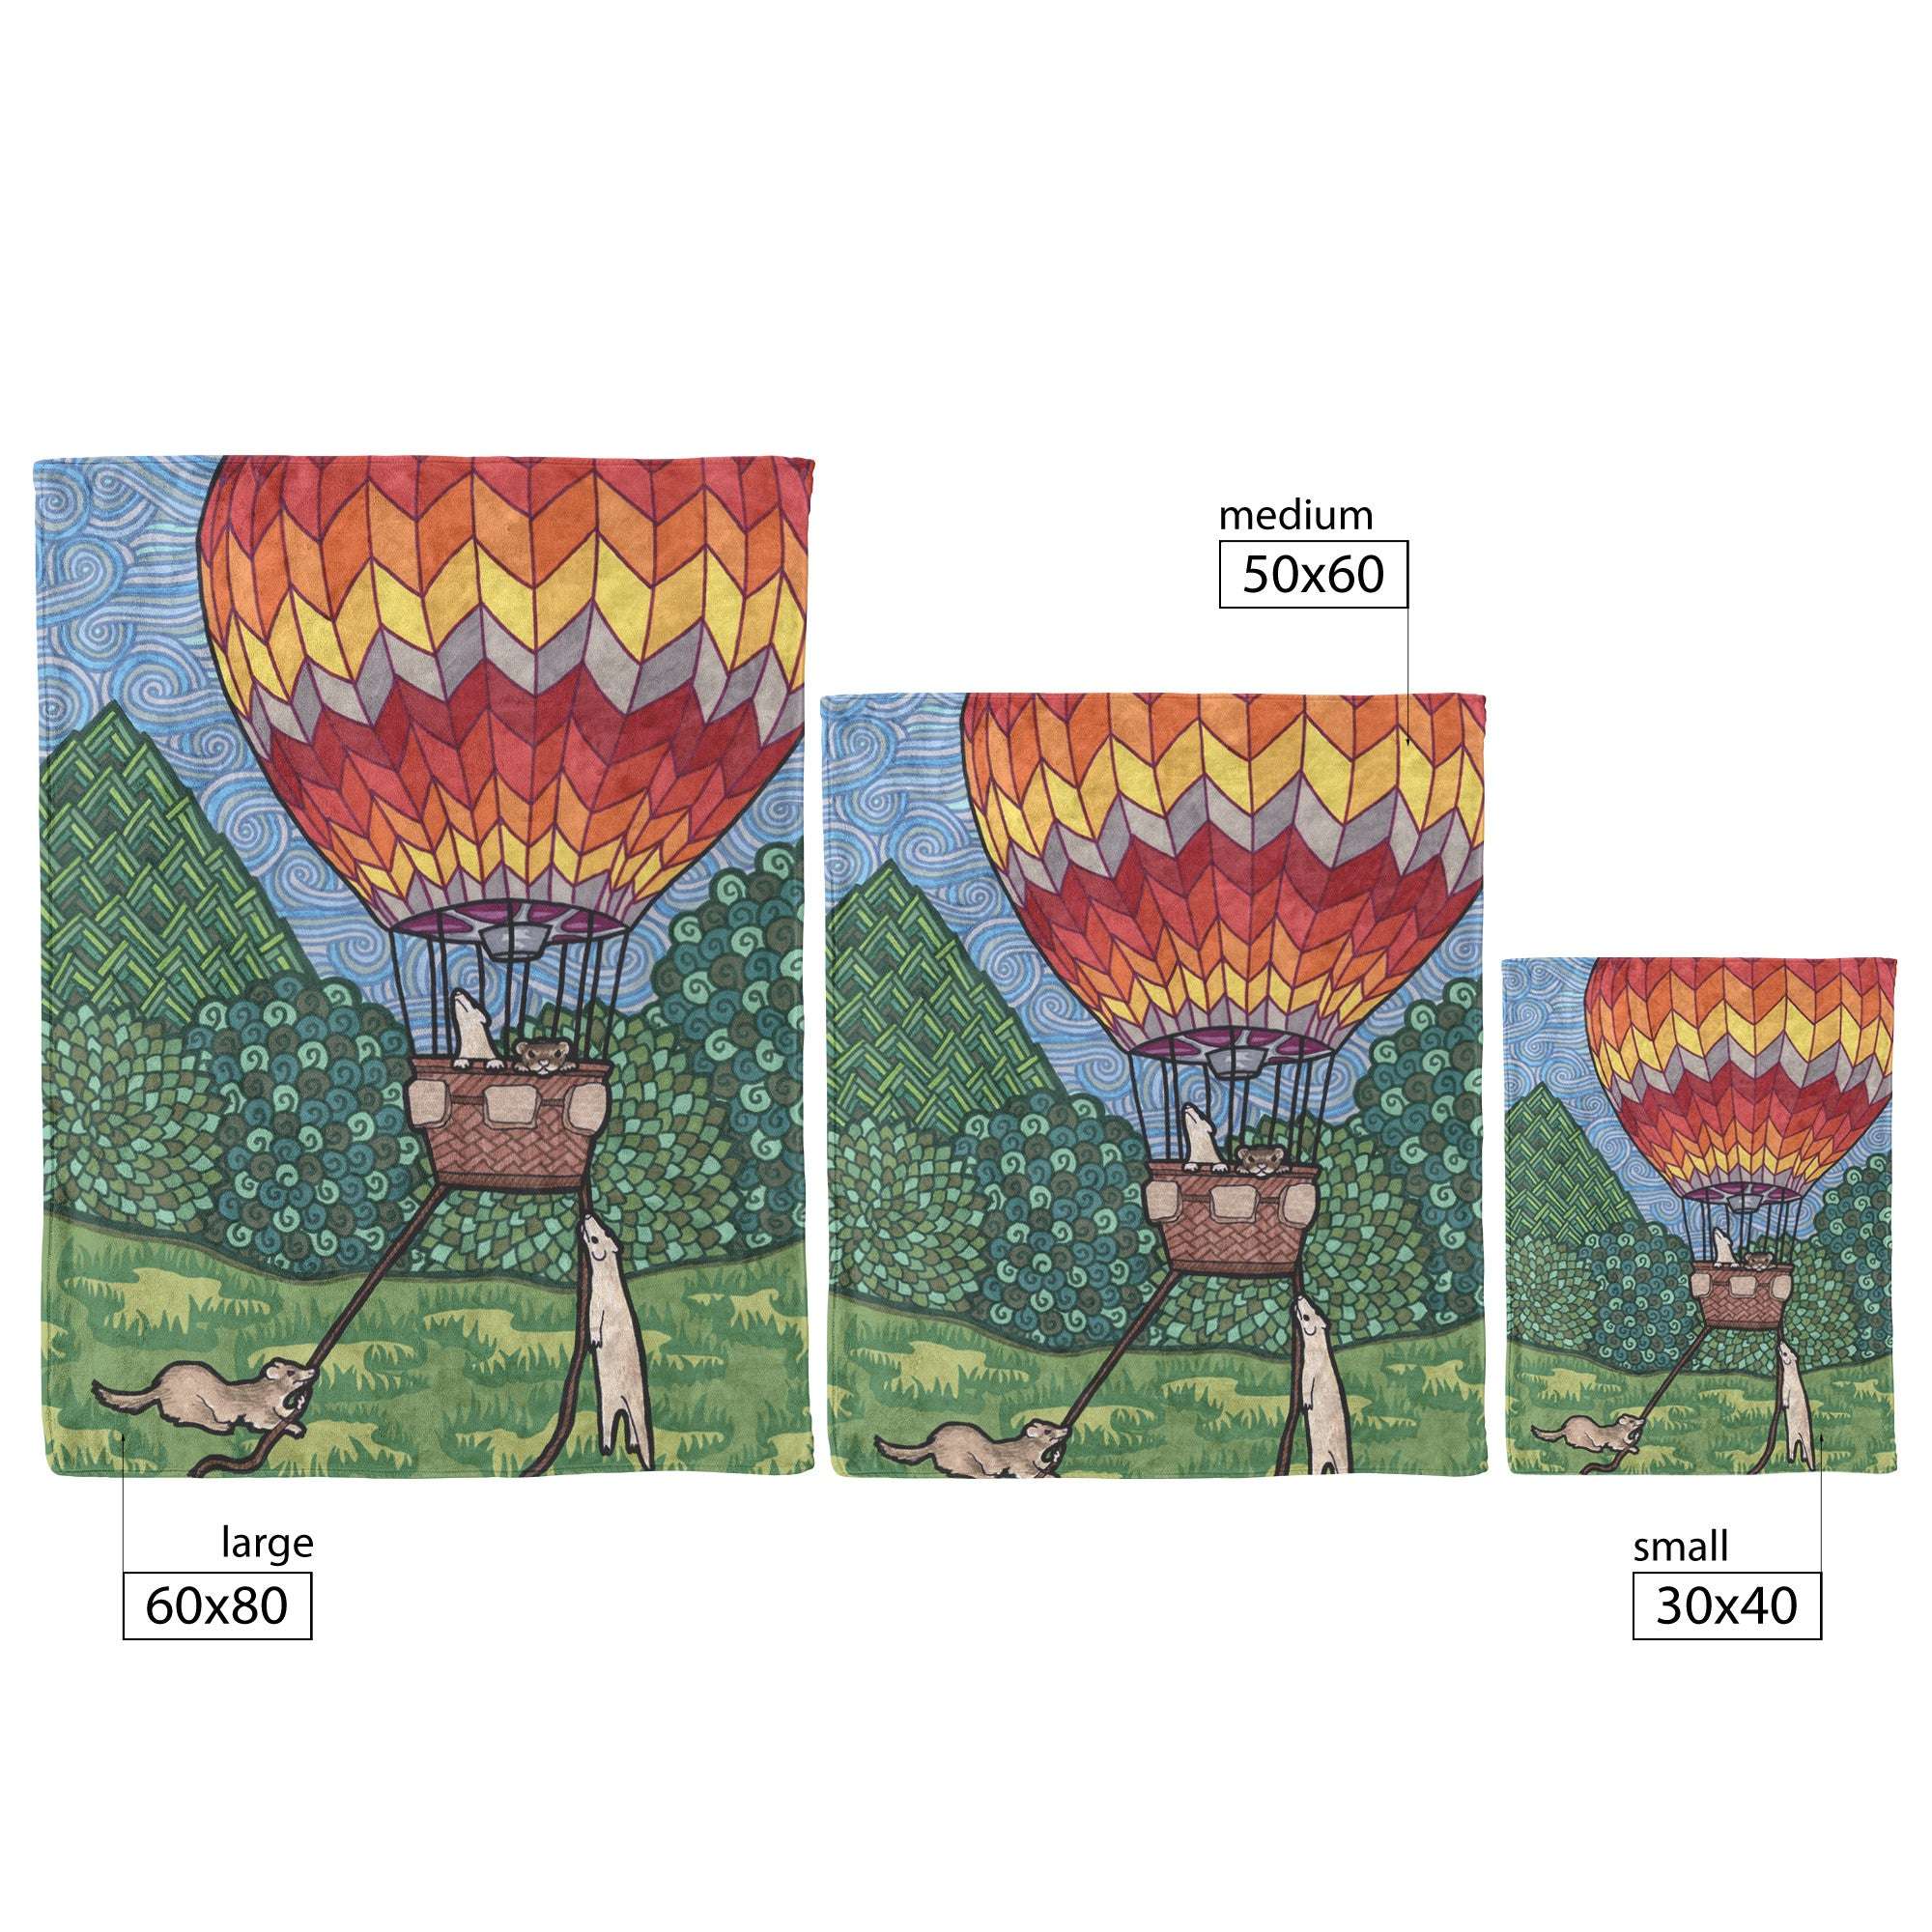 Three Ferret Blankets with ferrets in a hot air balloon, in varying sizes marked: large (60x80), medium (50x60), and small (30x40).